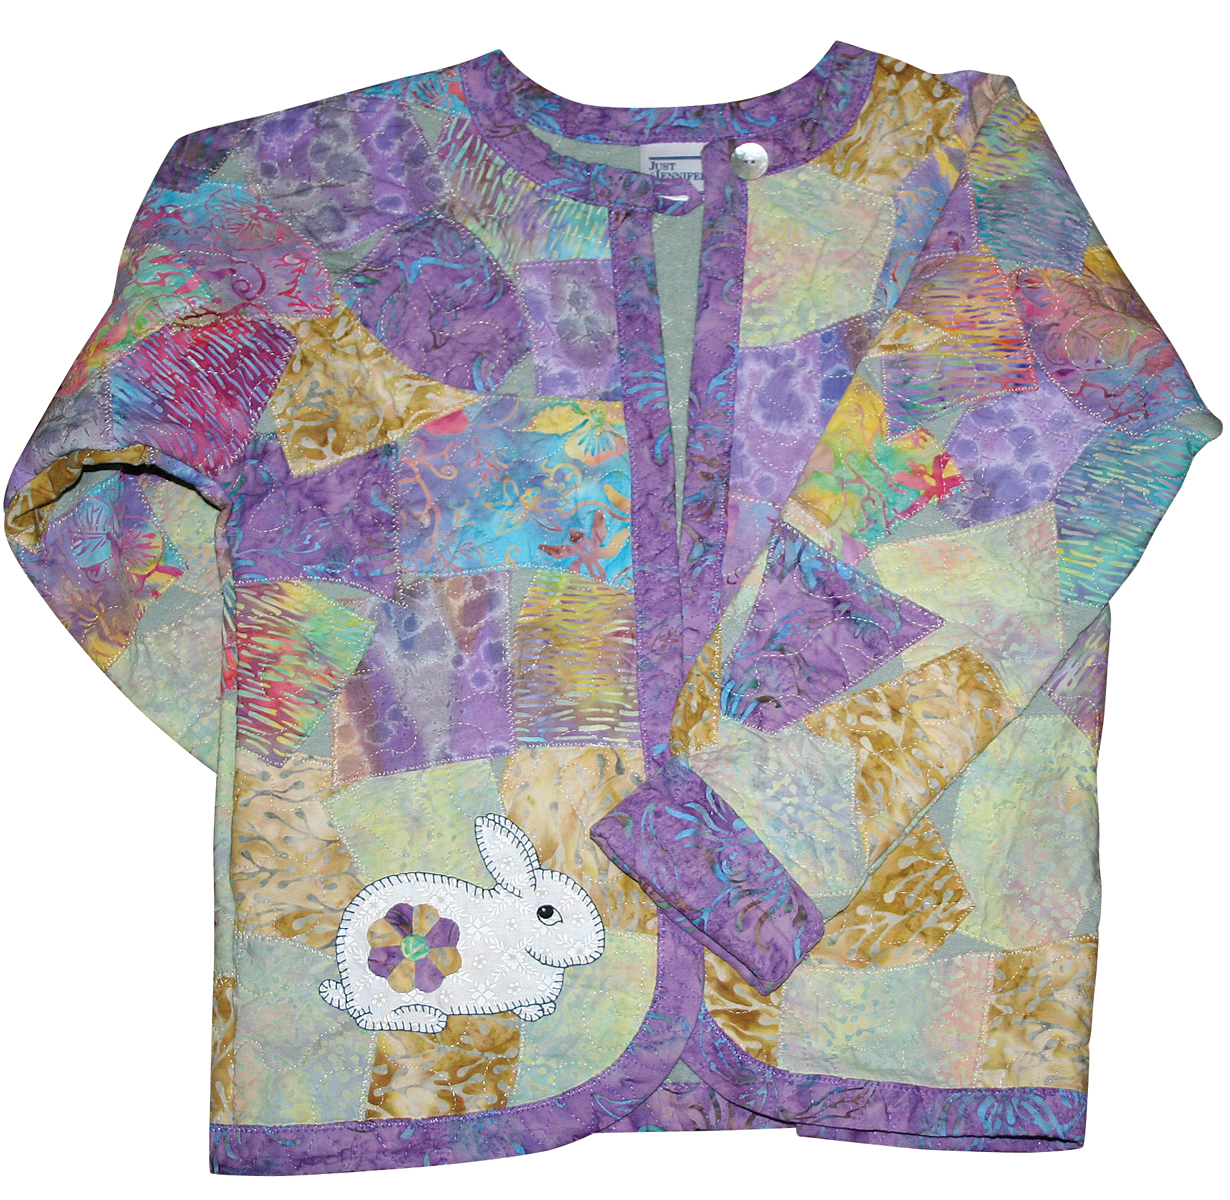 Jelly Bean Jacket Pattern at Everything Quilts